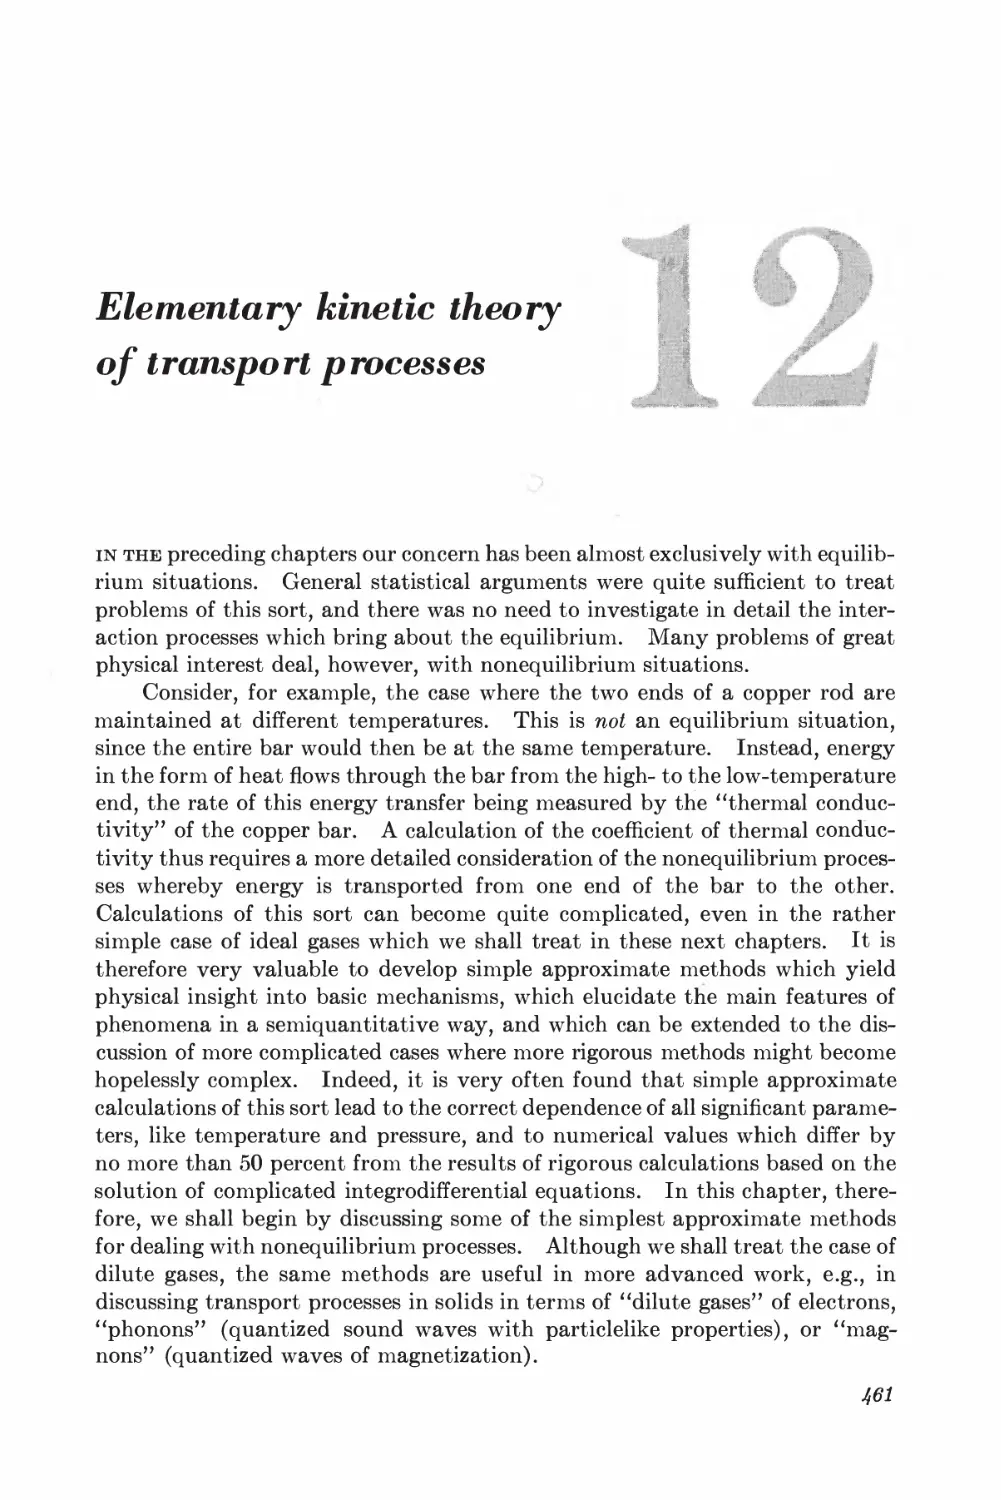 Chapter 12: Elementary Kinetic Theory of Transport Processes